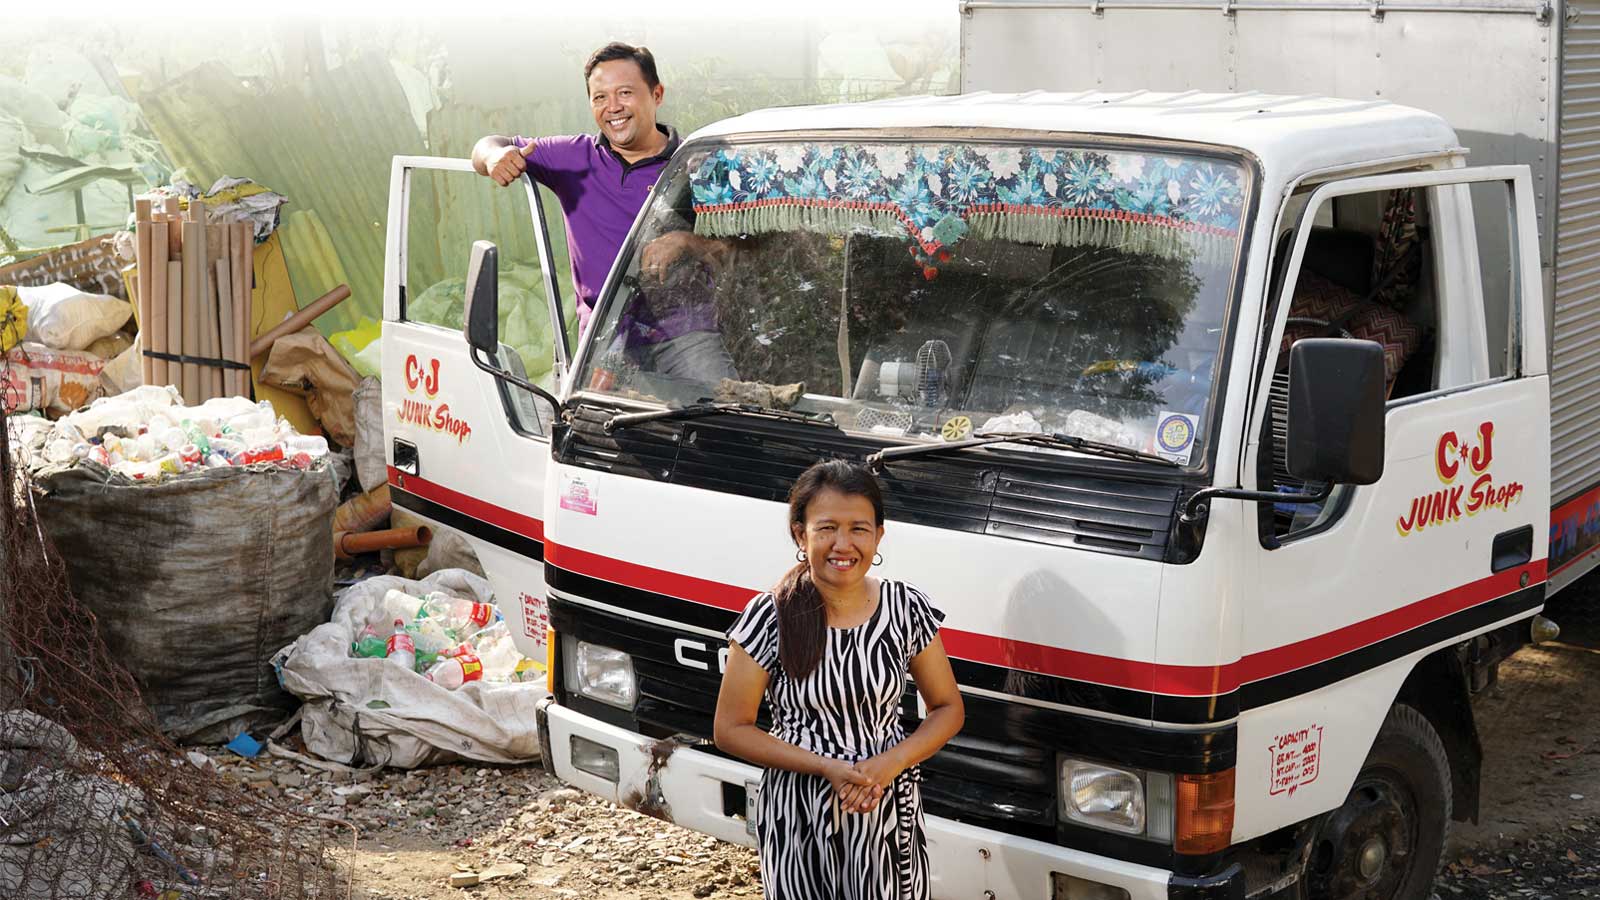 How This Man Turned Trash Into Cash